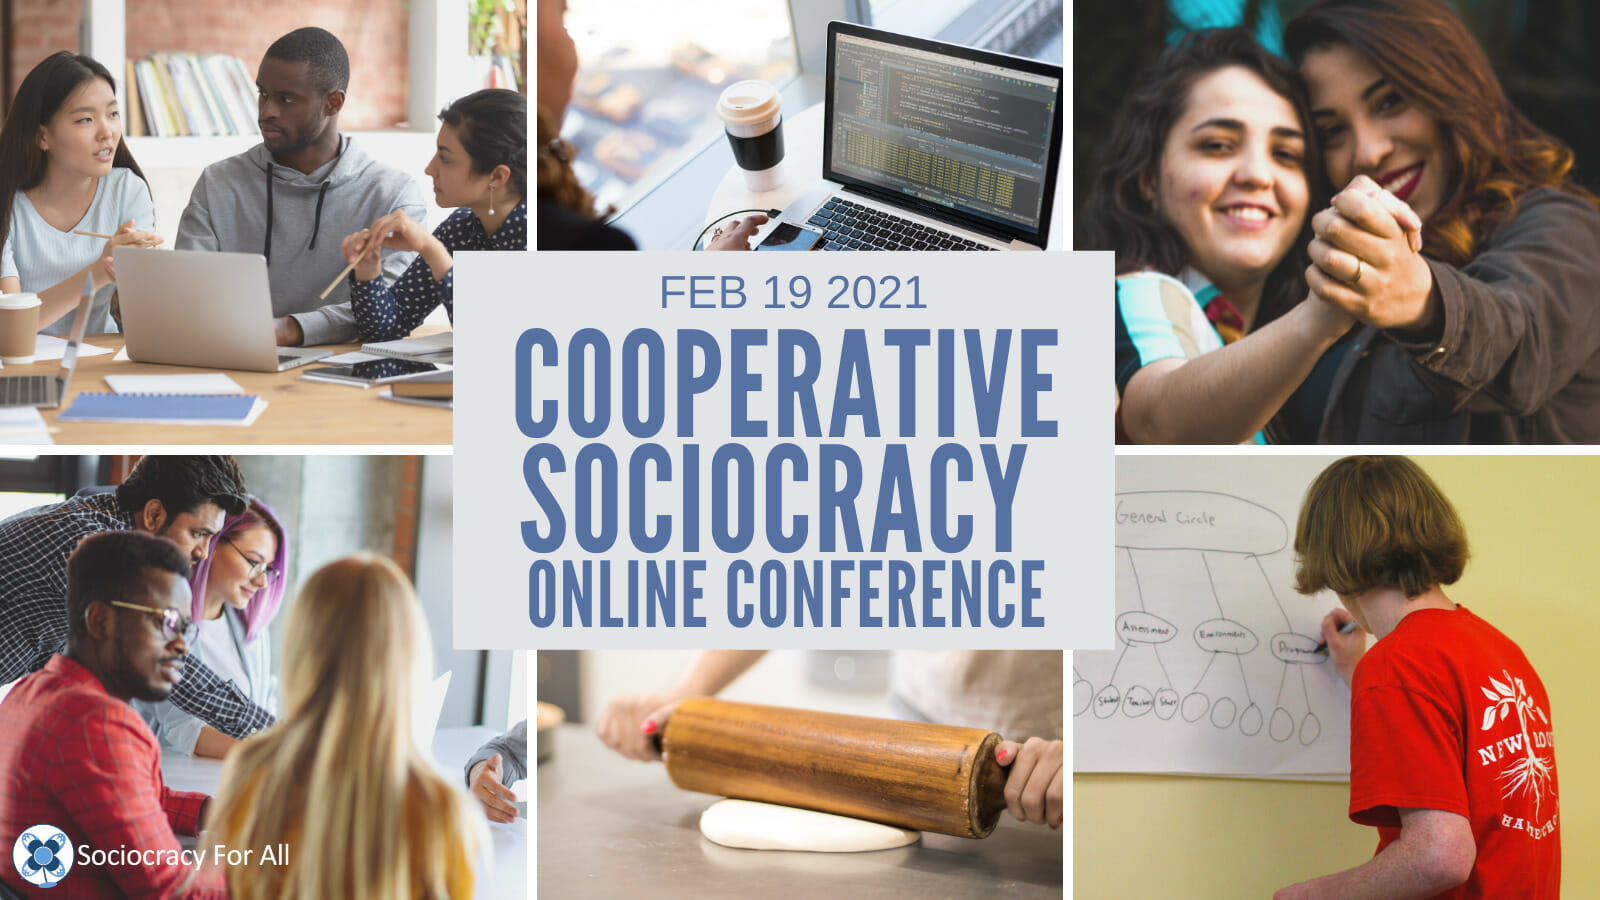 call for workshop proposals - sociocracy coop - Sociocracy For All